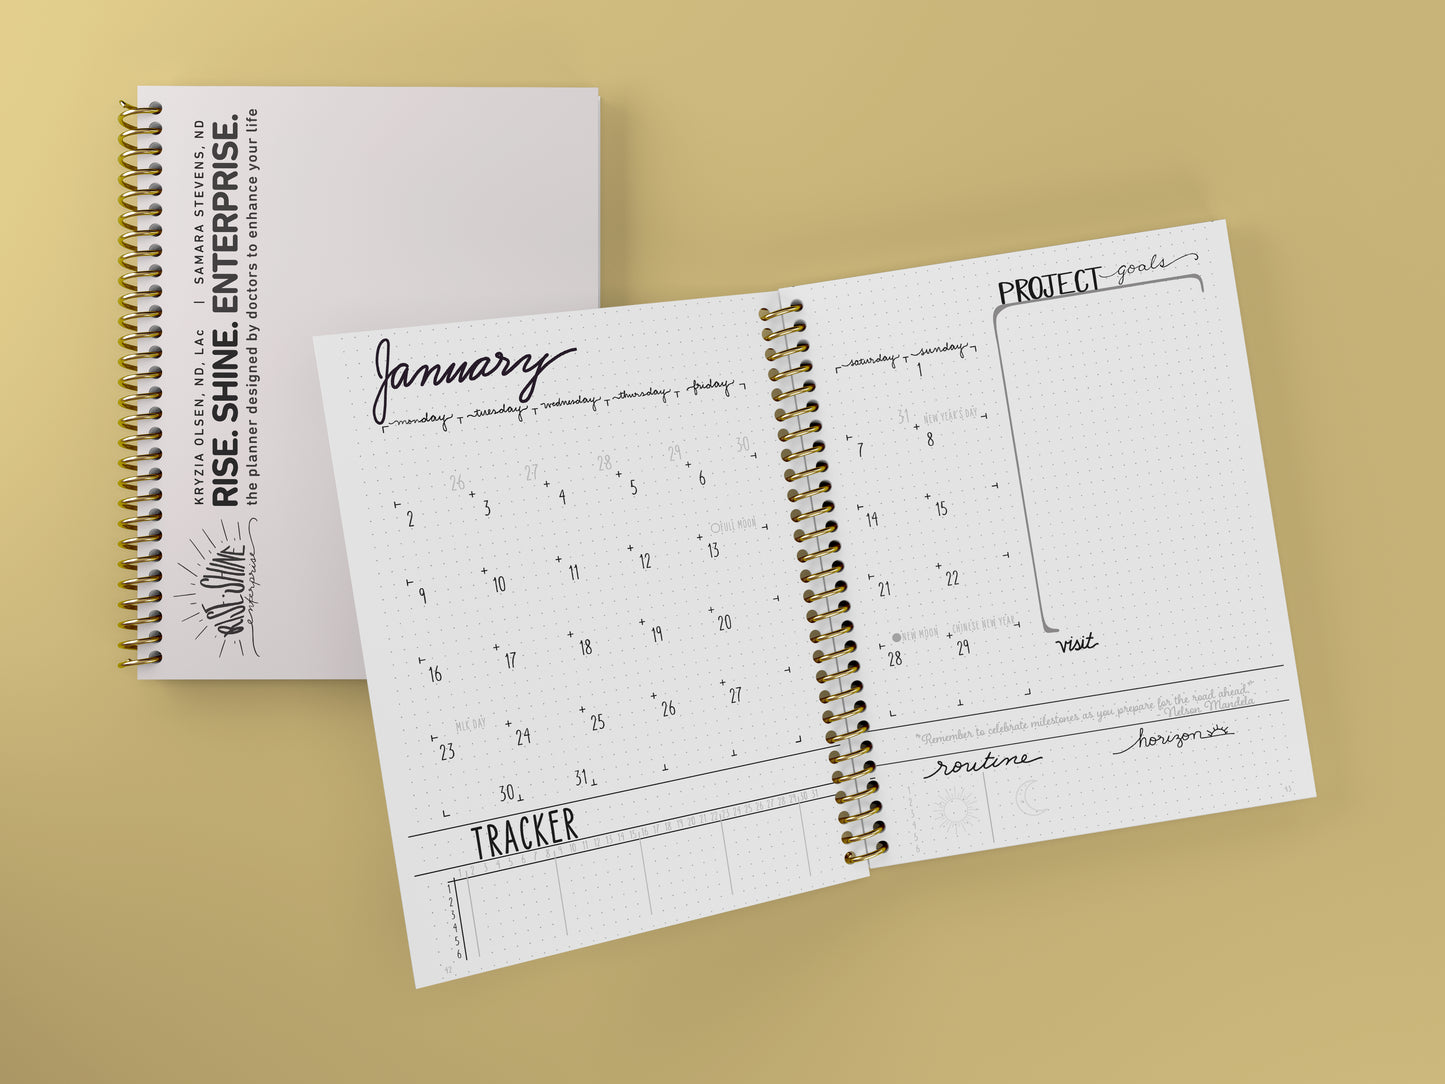 The Planner Designed by Doctors to Enhance Your Life